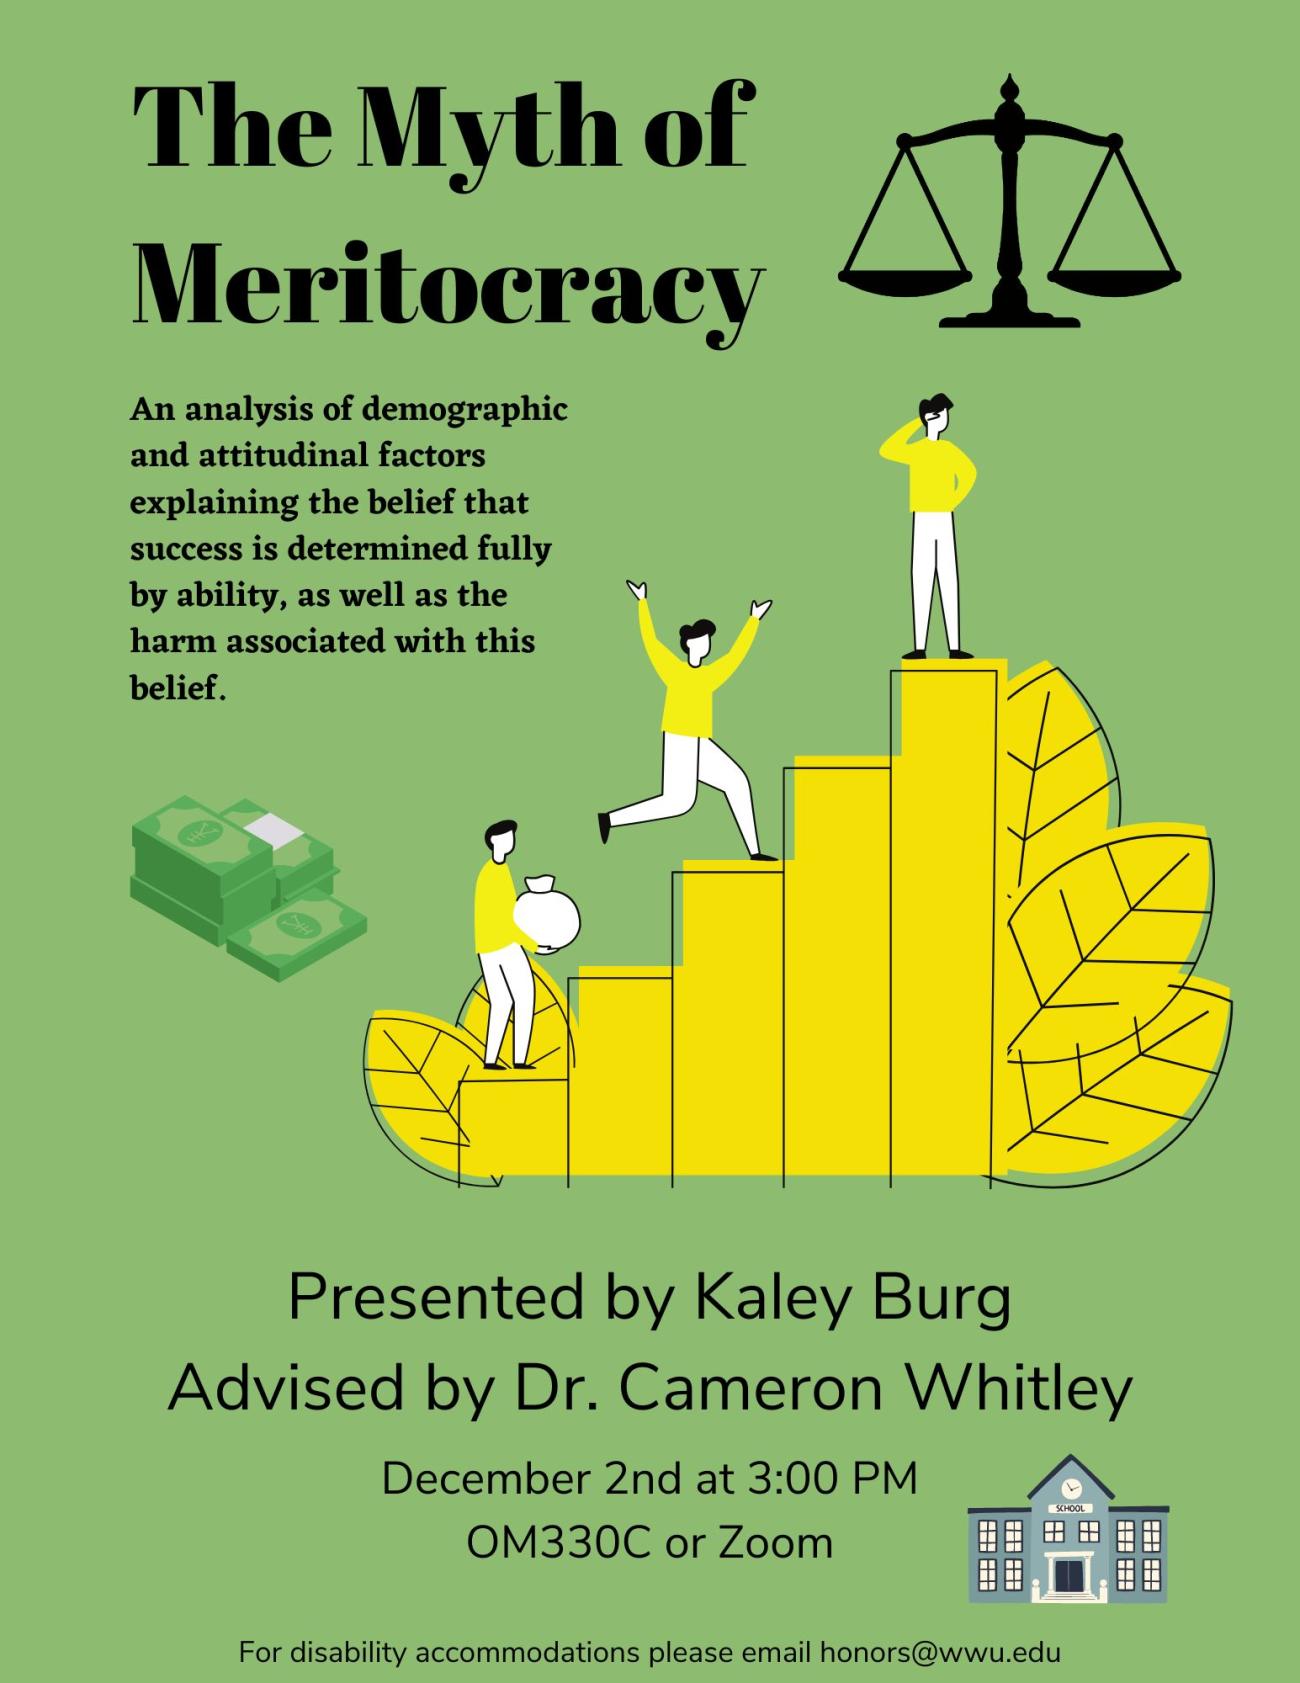 A green background with an image of yellow steps with a person running up them. Images of money, a school, and a scale in the background. Text stating “The Myth of Meritocracy” “An analysis of demographic and attitudinal factors explaining the belief that success is determined fully by ability, as well as the harm associated with this belief” “Presented by Kaley Burg Advised by Dr. Cameron Whitley” “December 2nd at 3:00 PM OM330C or Zoom” “For disability accommodations please email honors@wwu.edu”